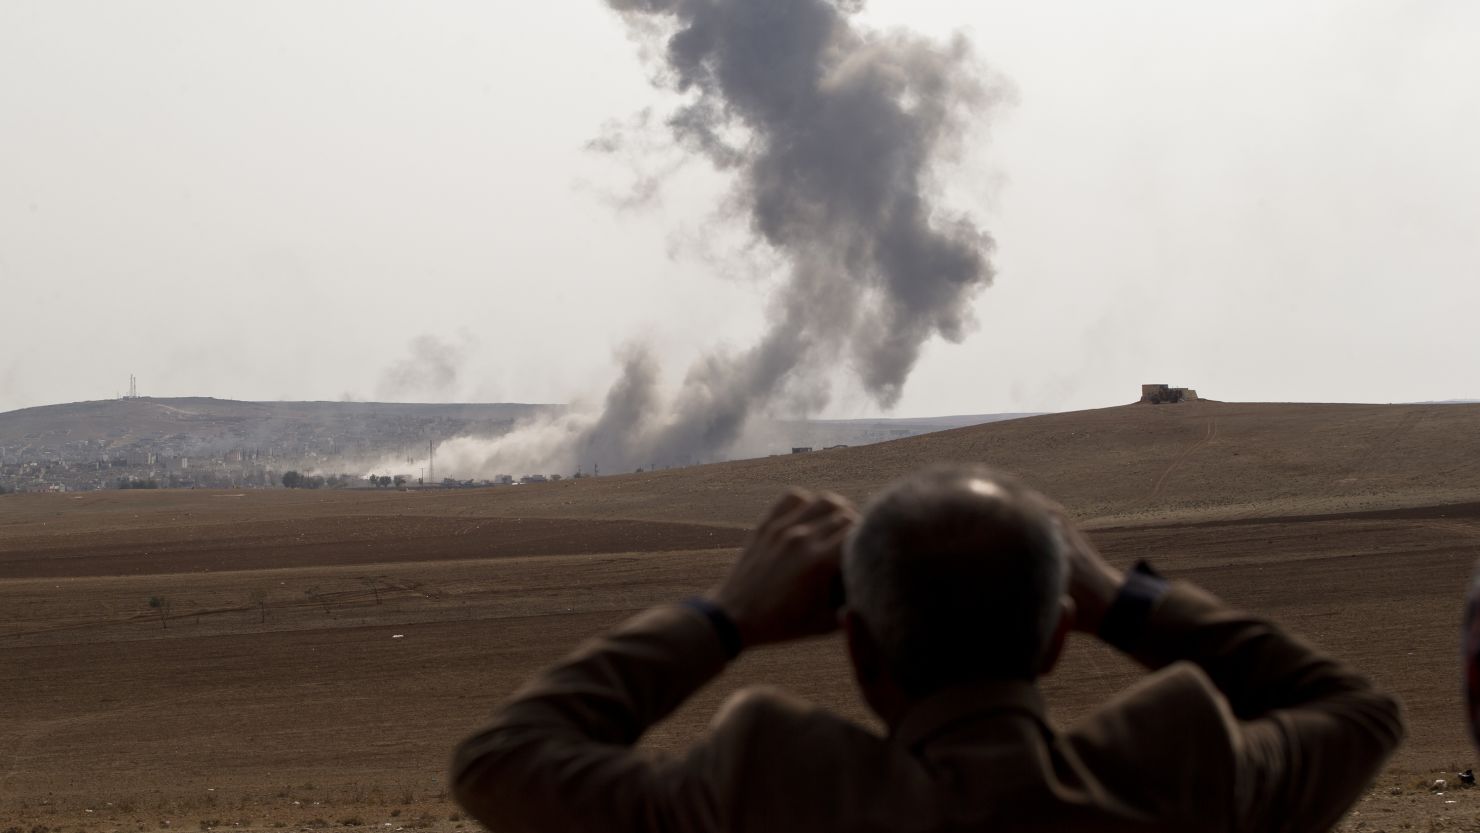 A man watches through binoculars as smoke rises over Kobani during airstrikes by the US-led coalition on October 28, 2014.